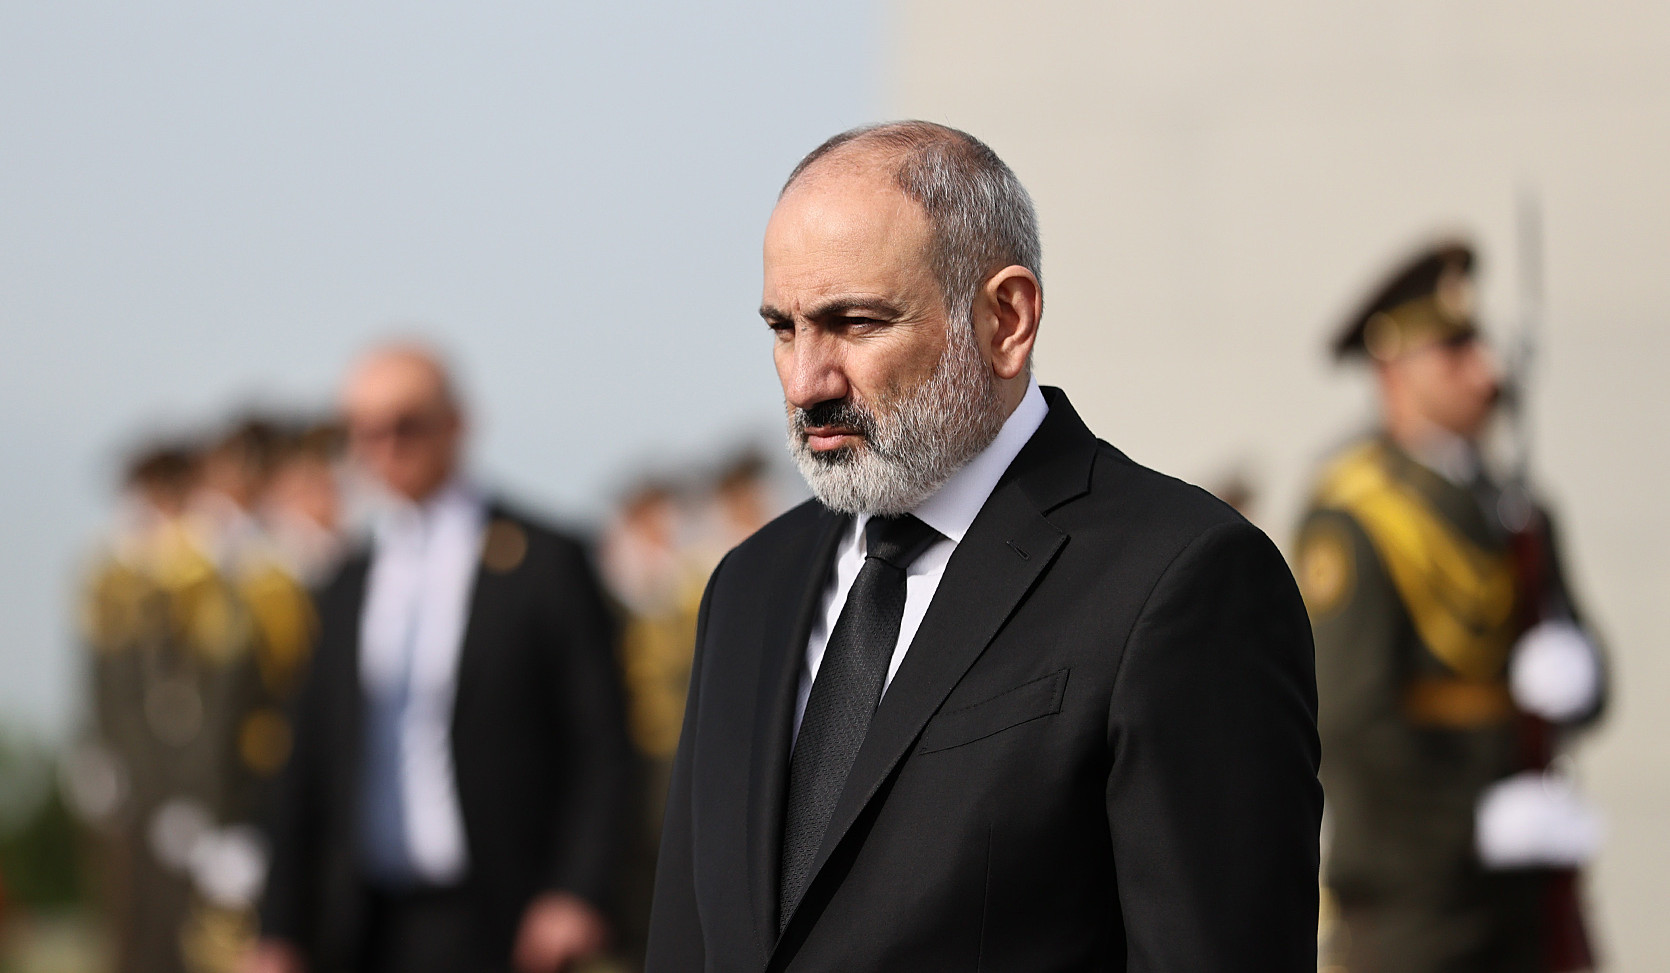 Prime Minister Nikol Pashinyan paid tribute to memory of victims of Armenian Genocide in Tsitsernakaberd